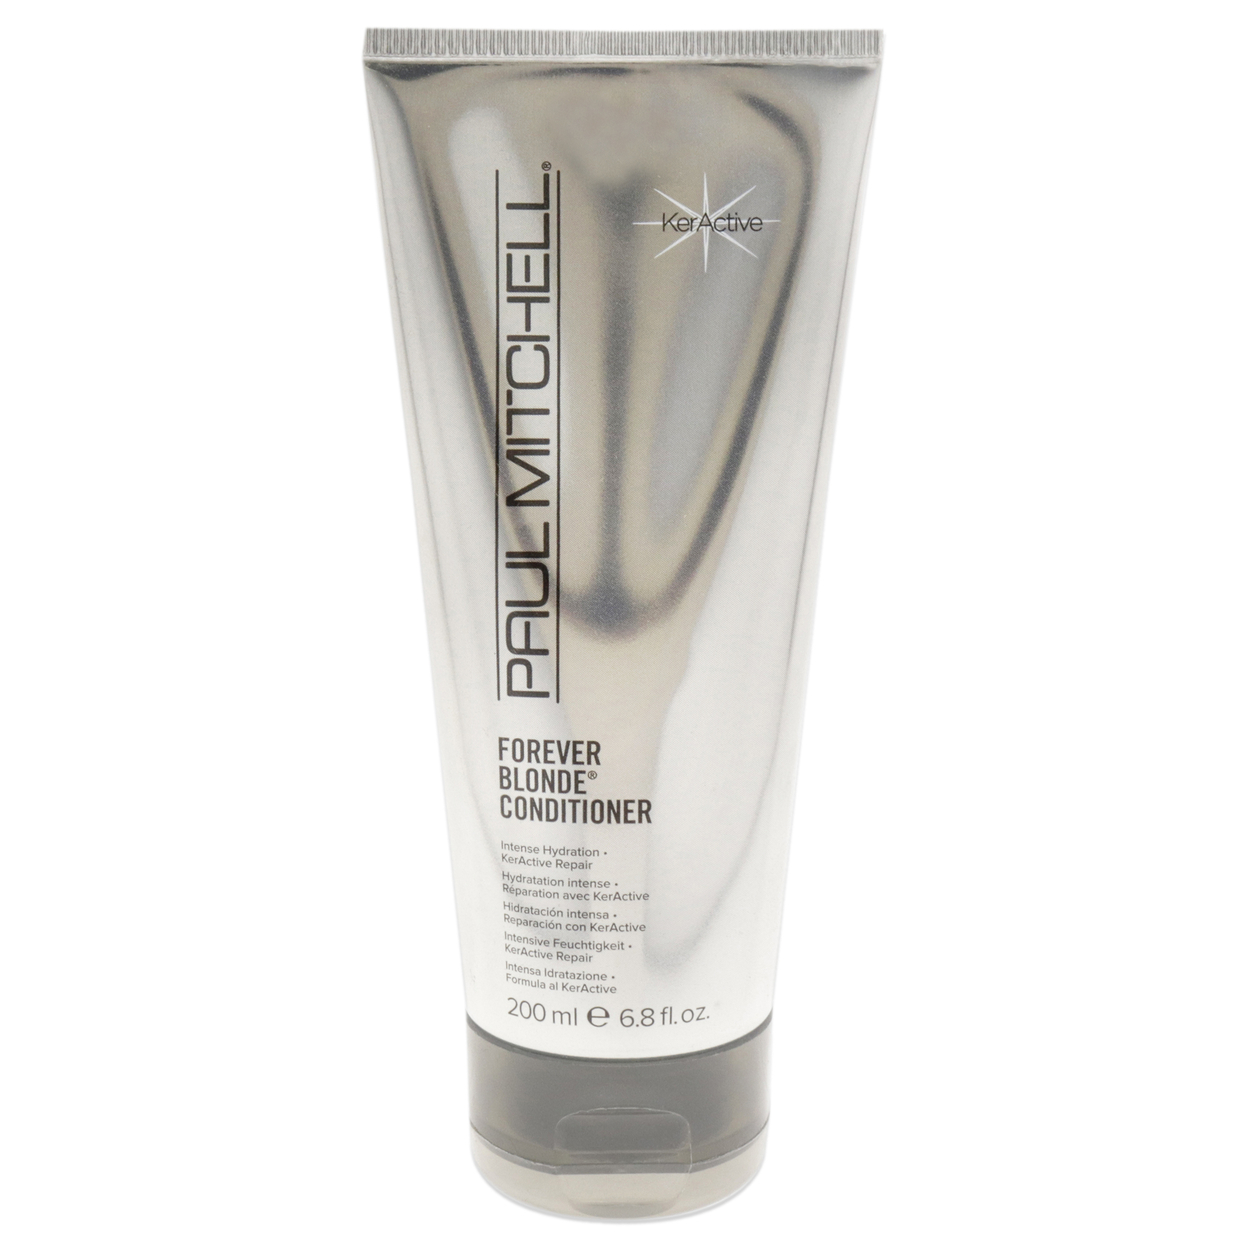 Paul Mitchell Unisex HAIRCARE KerActive Forever Blonde Conditioner 6.8 Oz